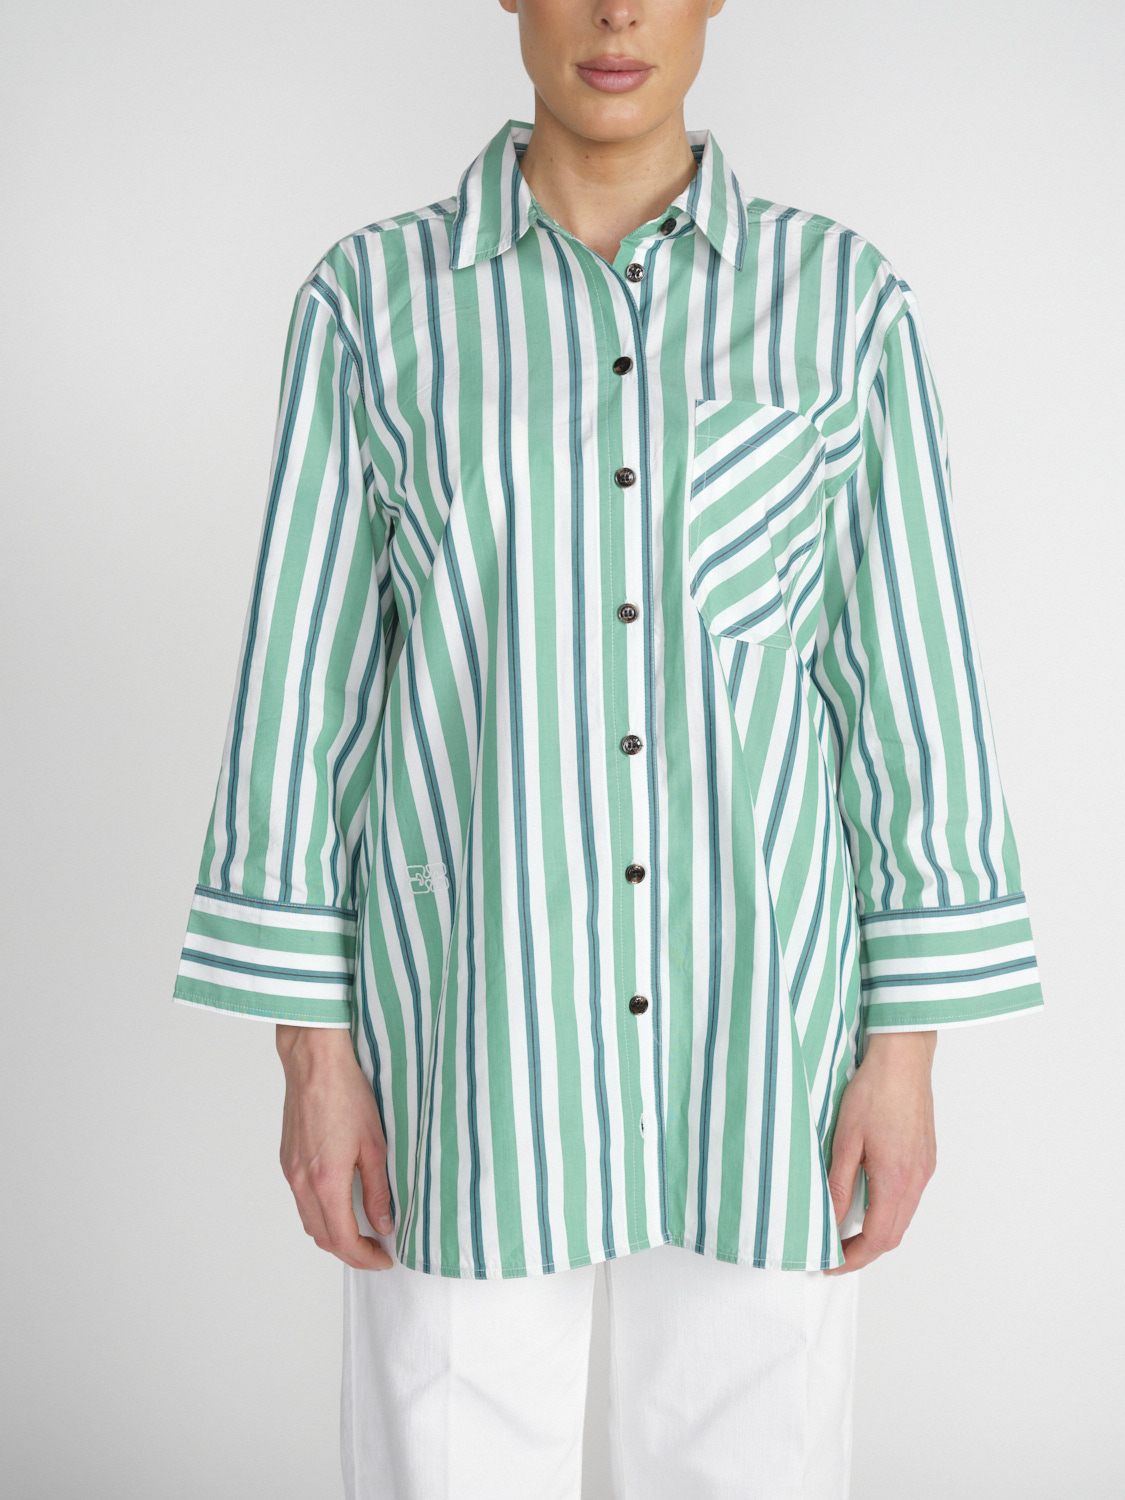 Ganni Oversized cotton shirt with a striped design  green 38